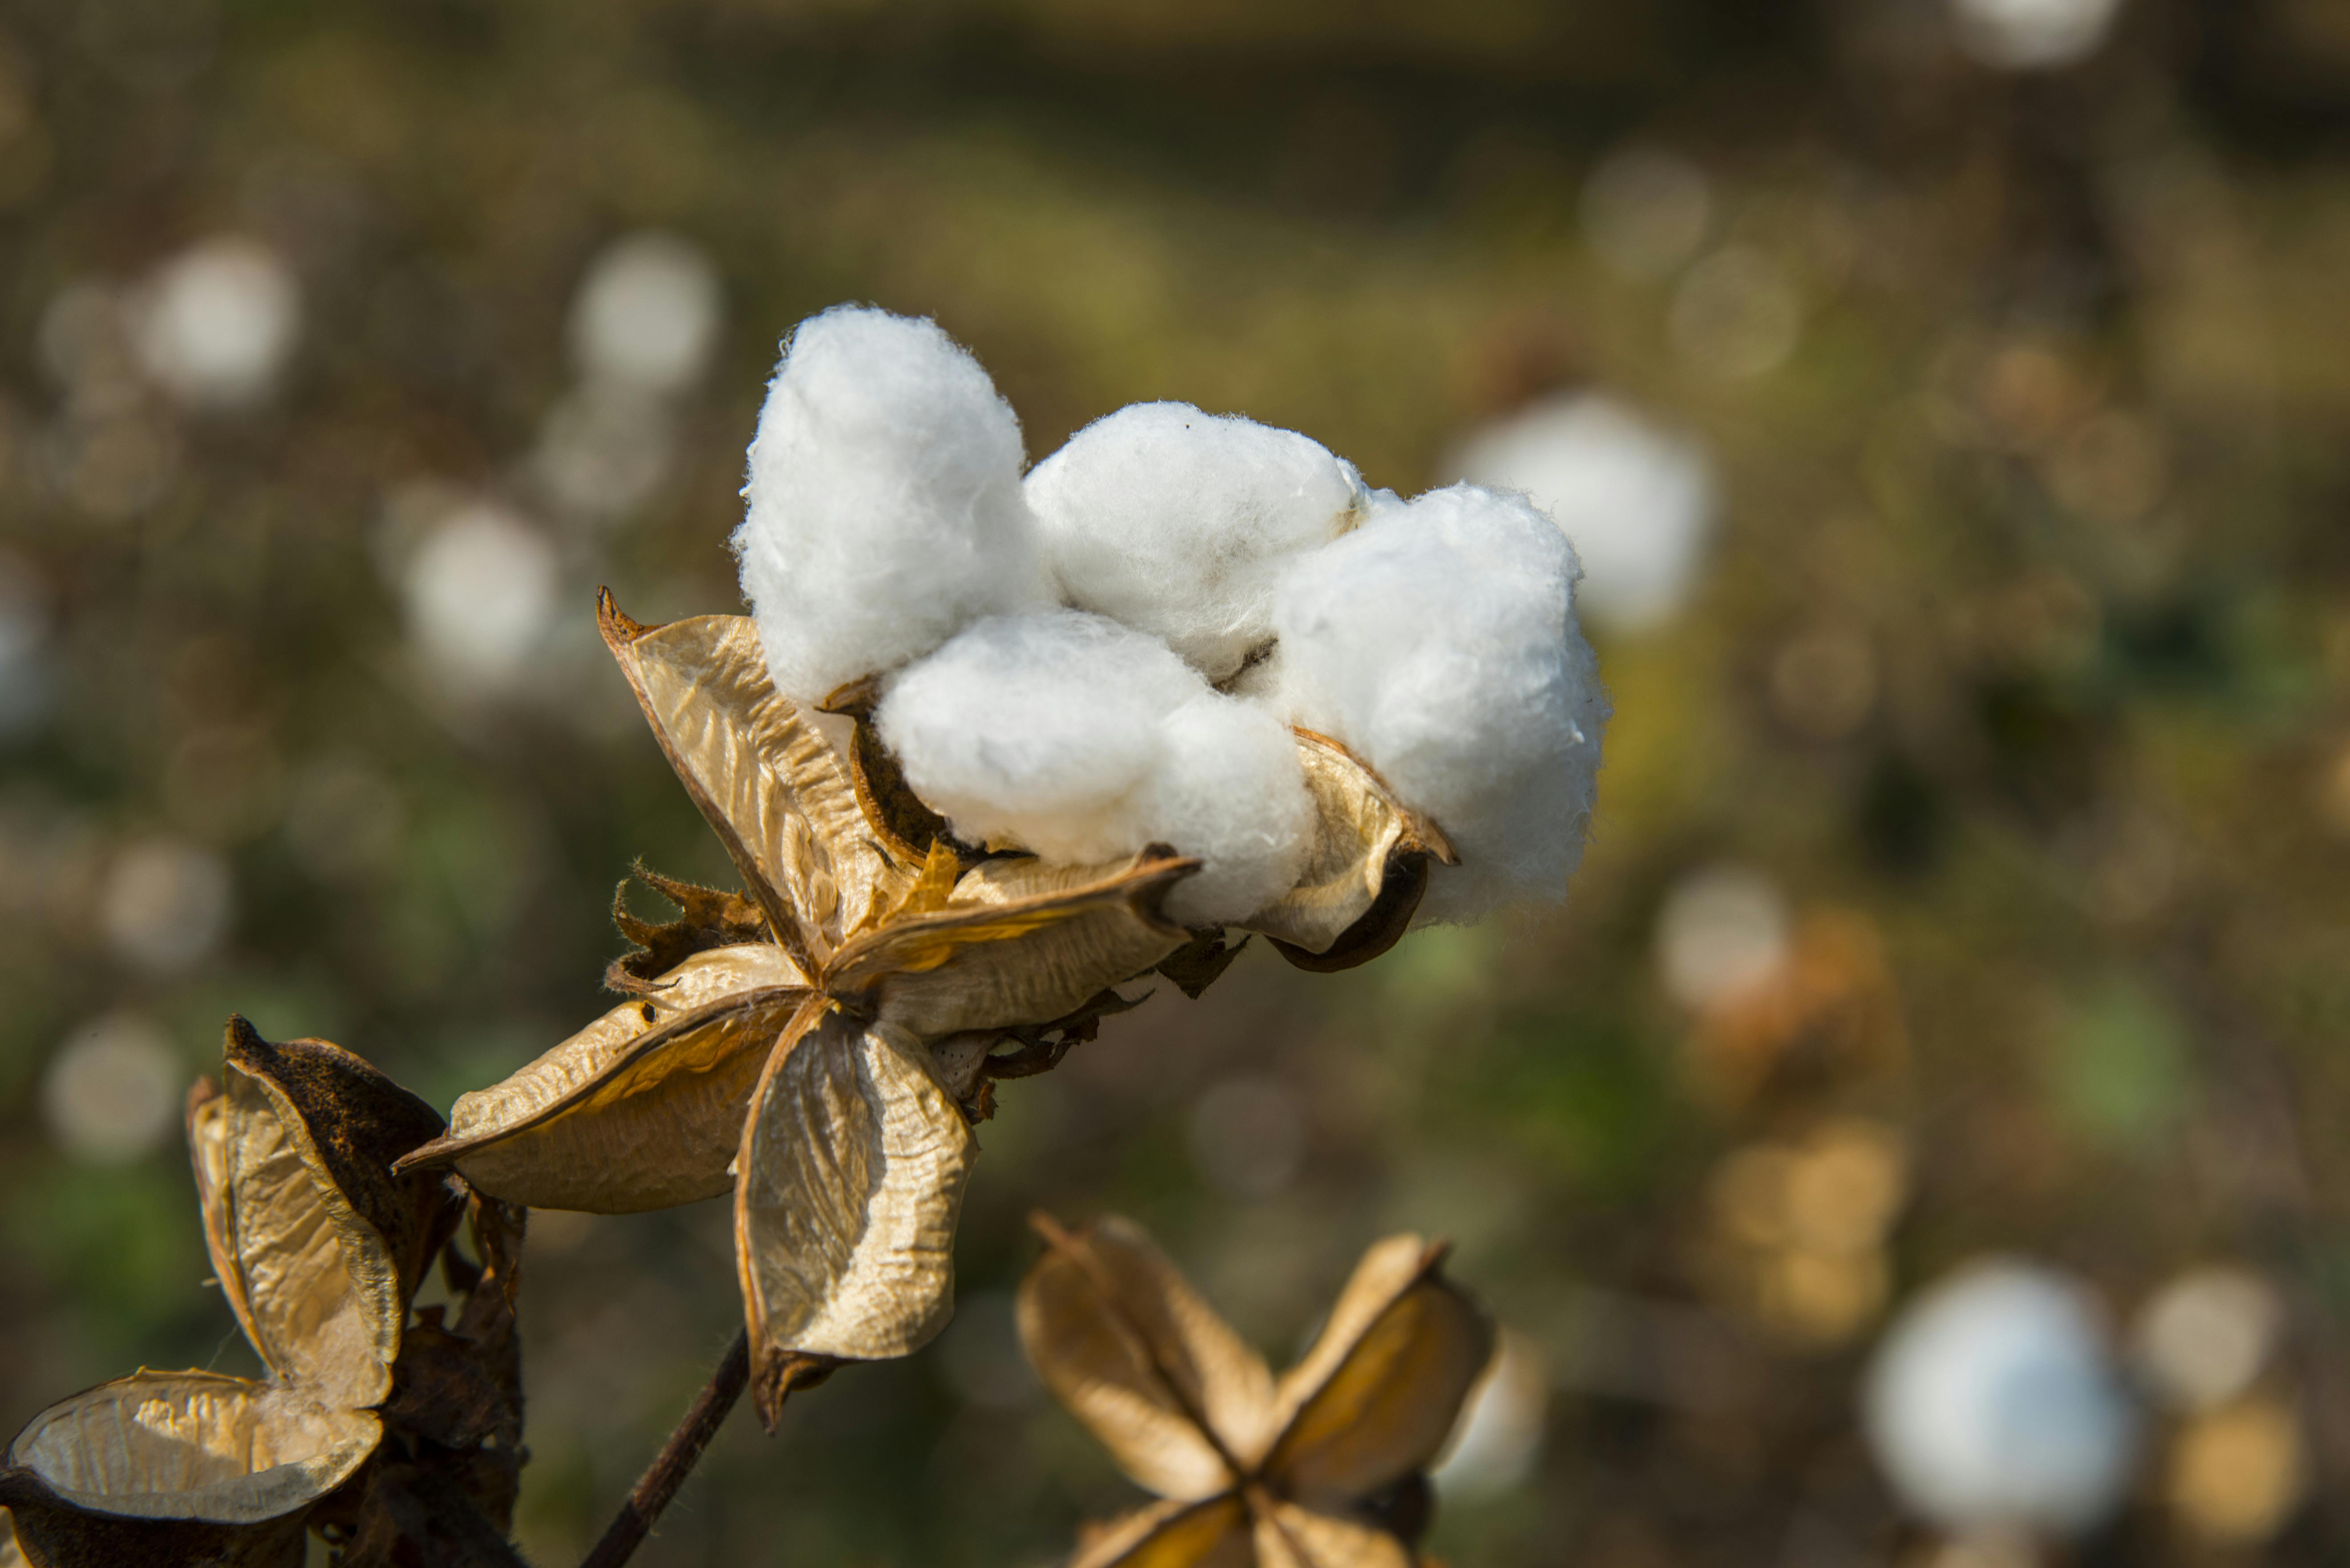  close up of a cotton flower ready to be picked